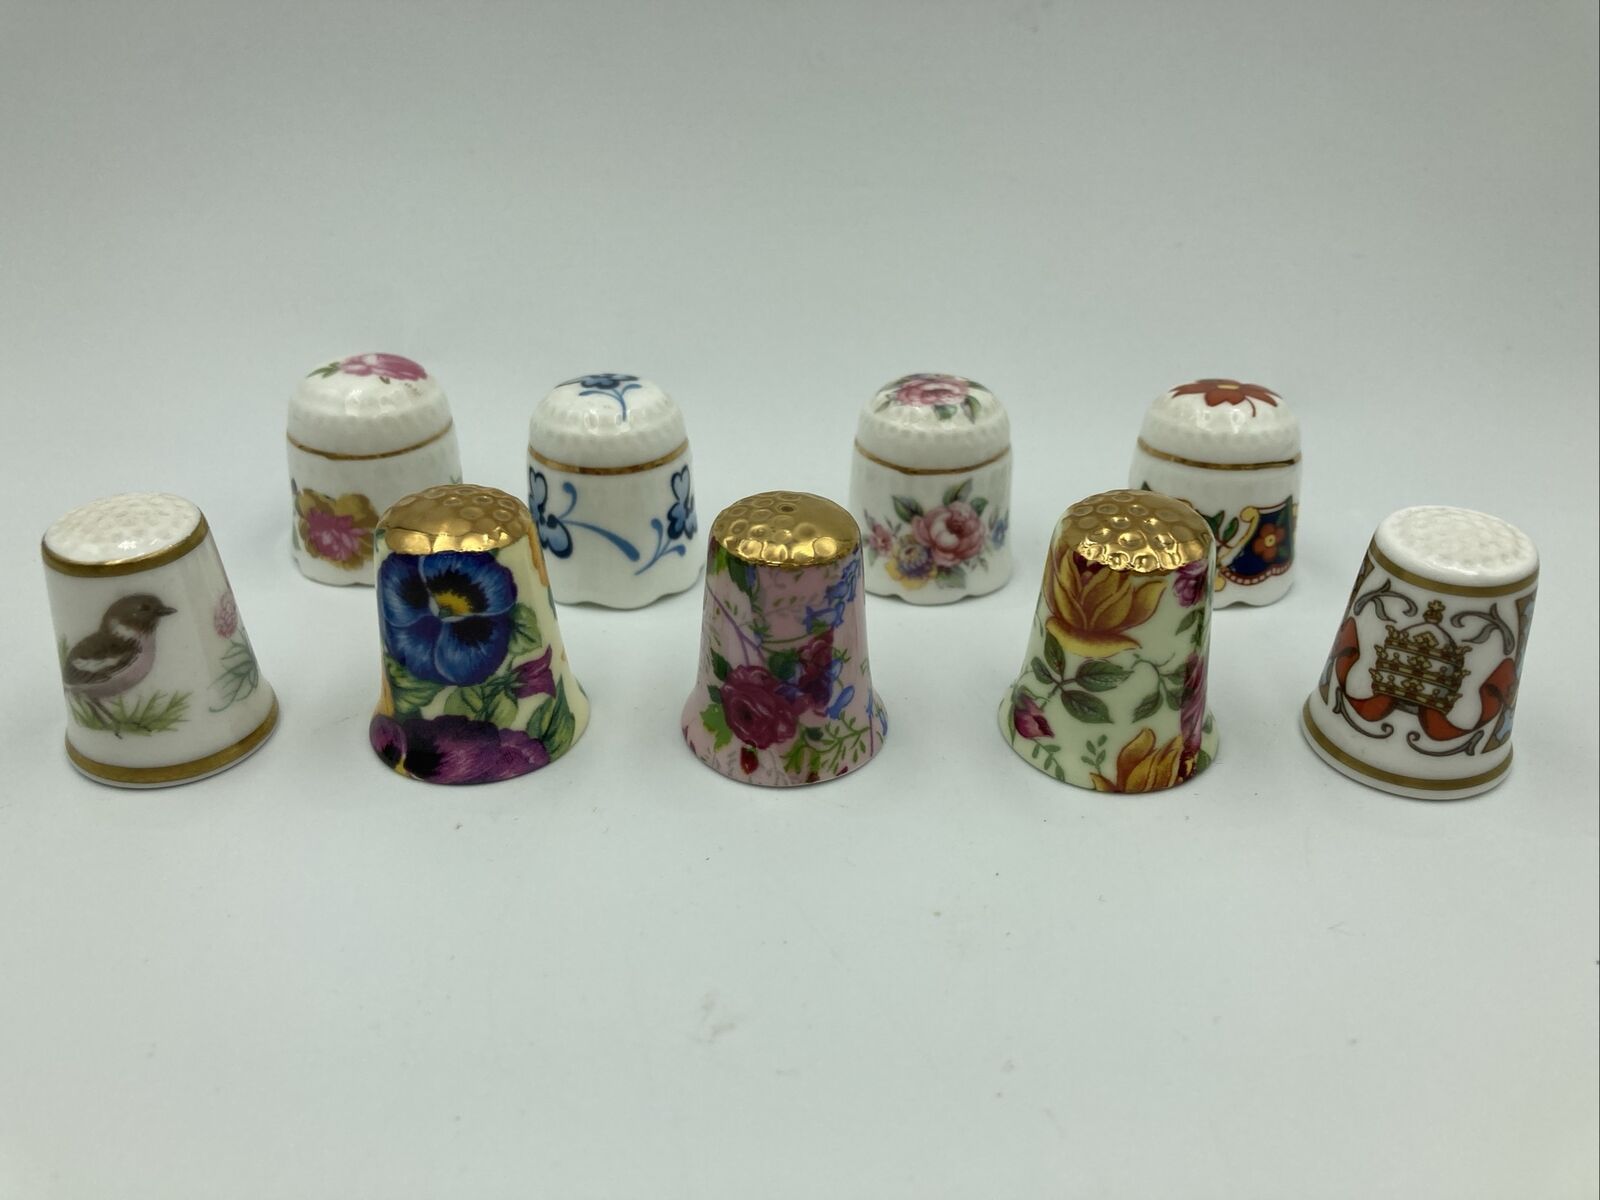 Lot of 9 x Thimbles - Bone China - Flowers, Royal Worcester, English Collectable